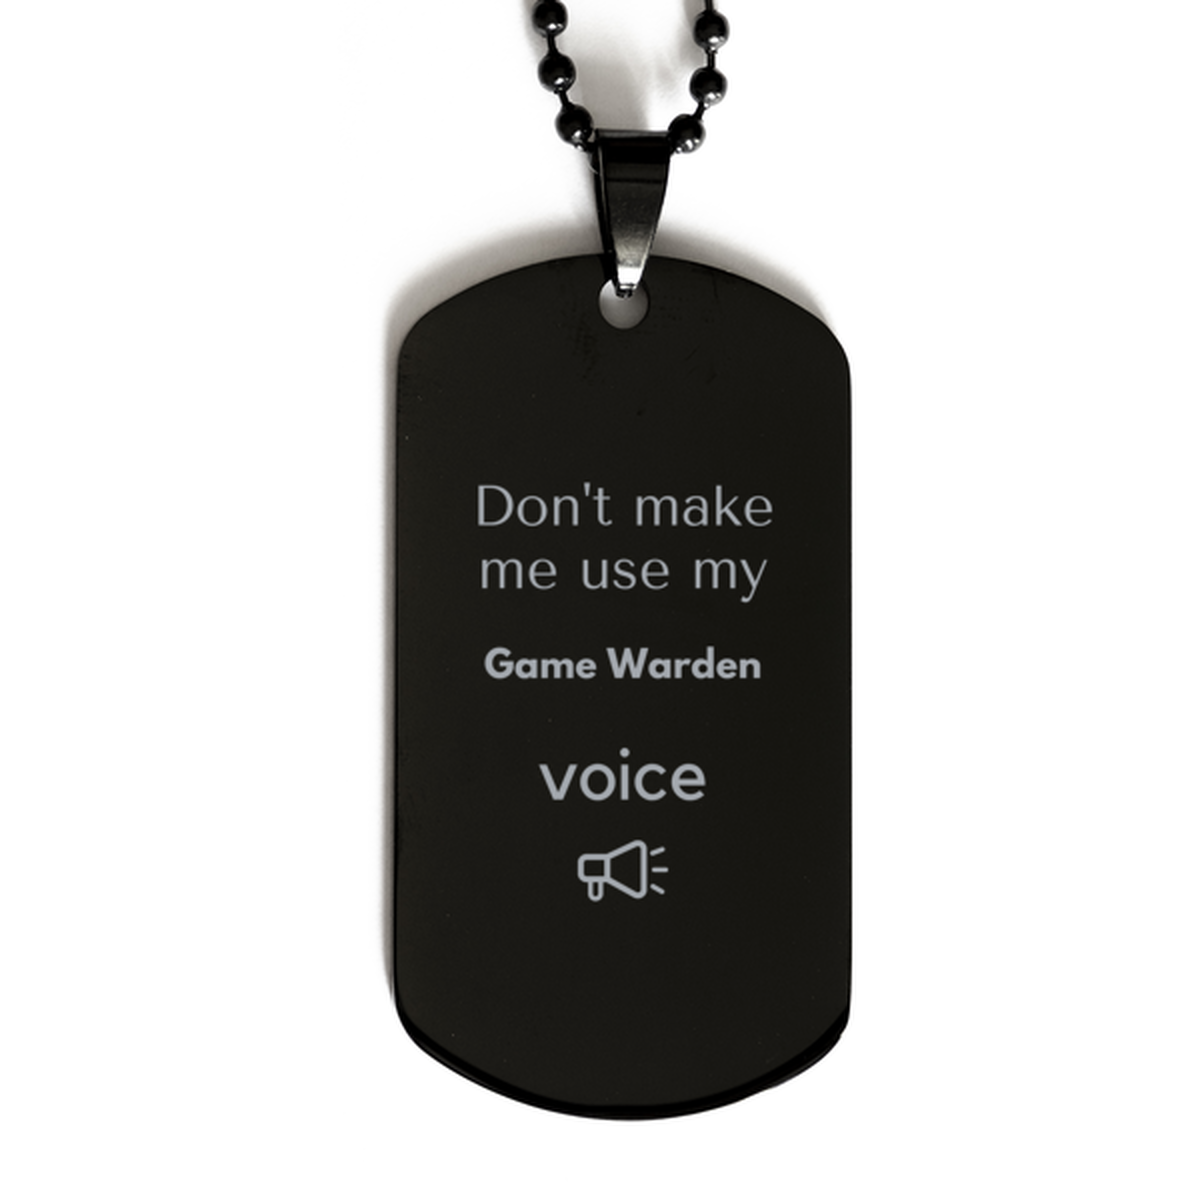 Don't make me use my Game Warden voice, Sarcasm Game Warden Gifts, Christmas Game Warden Black Dog Tag Birthday Unique Gifts For Game Warden Coworkers, Men, Women, Colleague, Friends